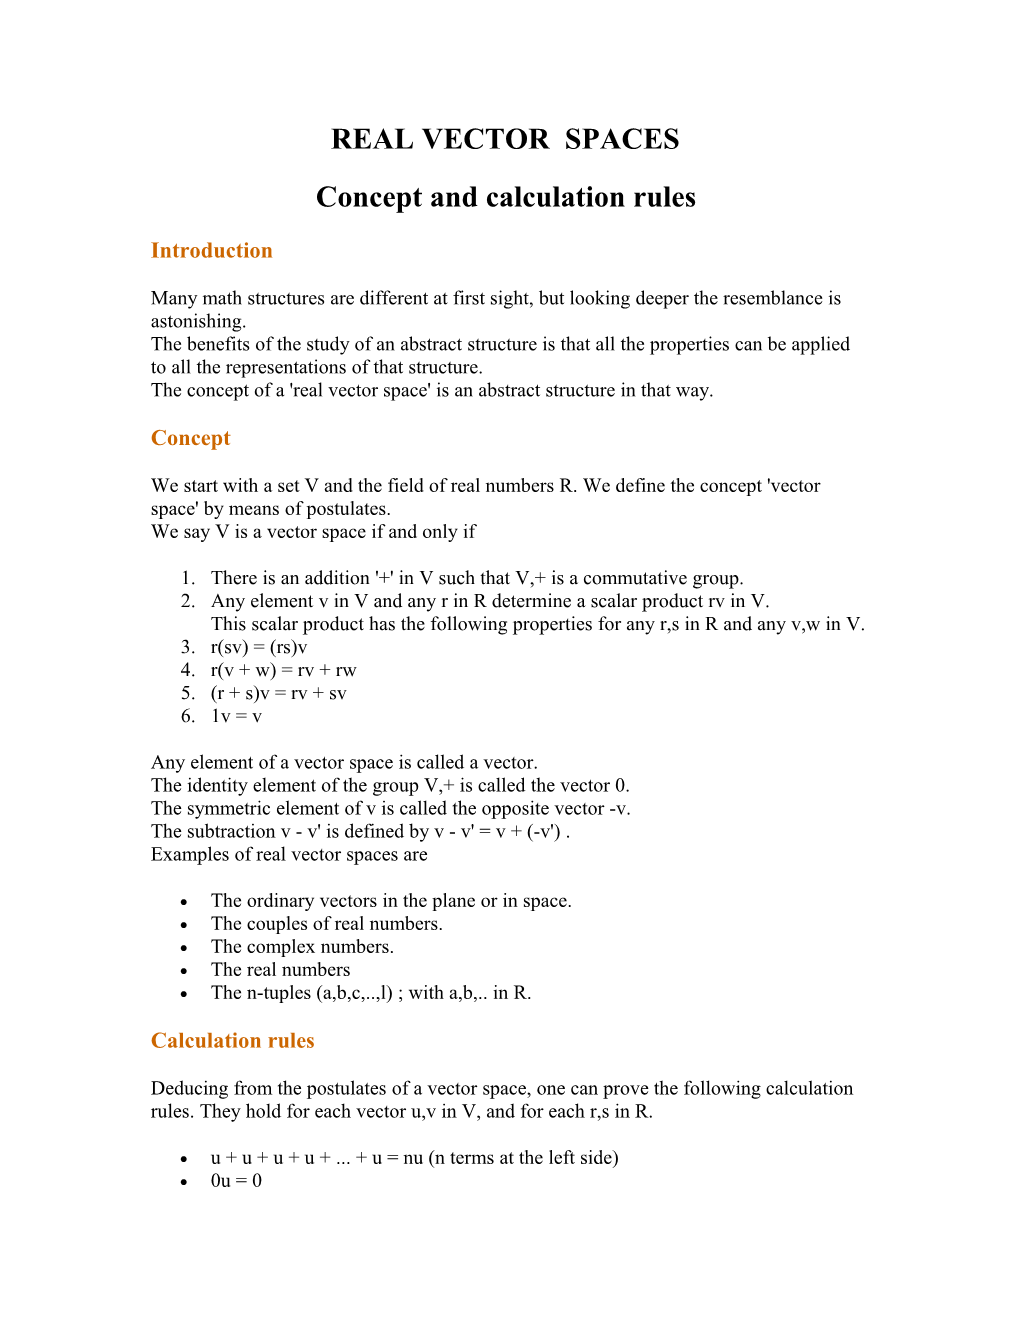 Concept and Calculation Rules